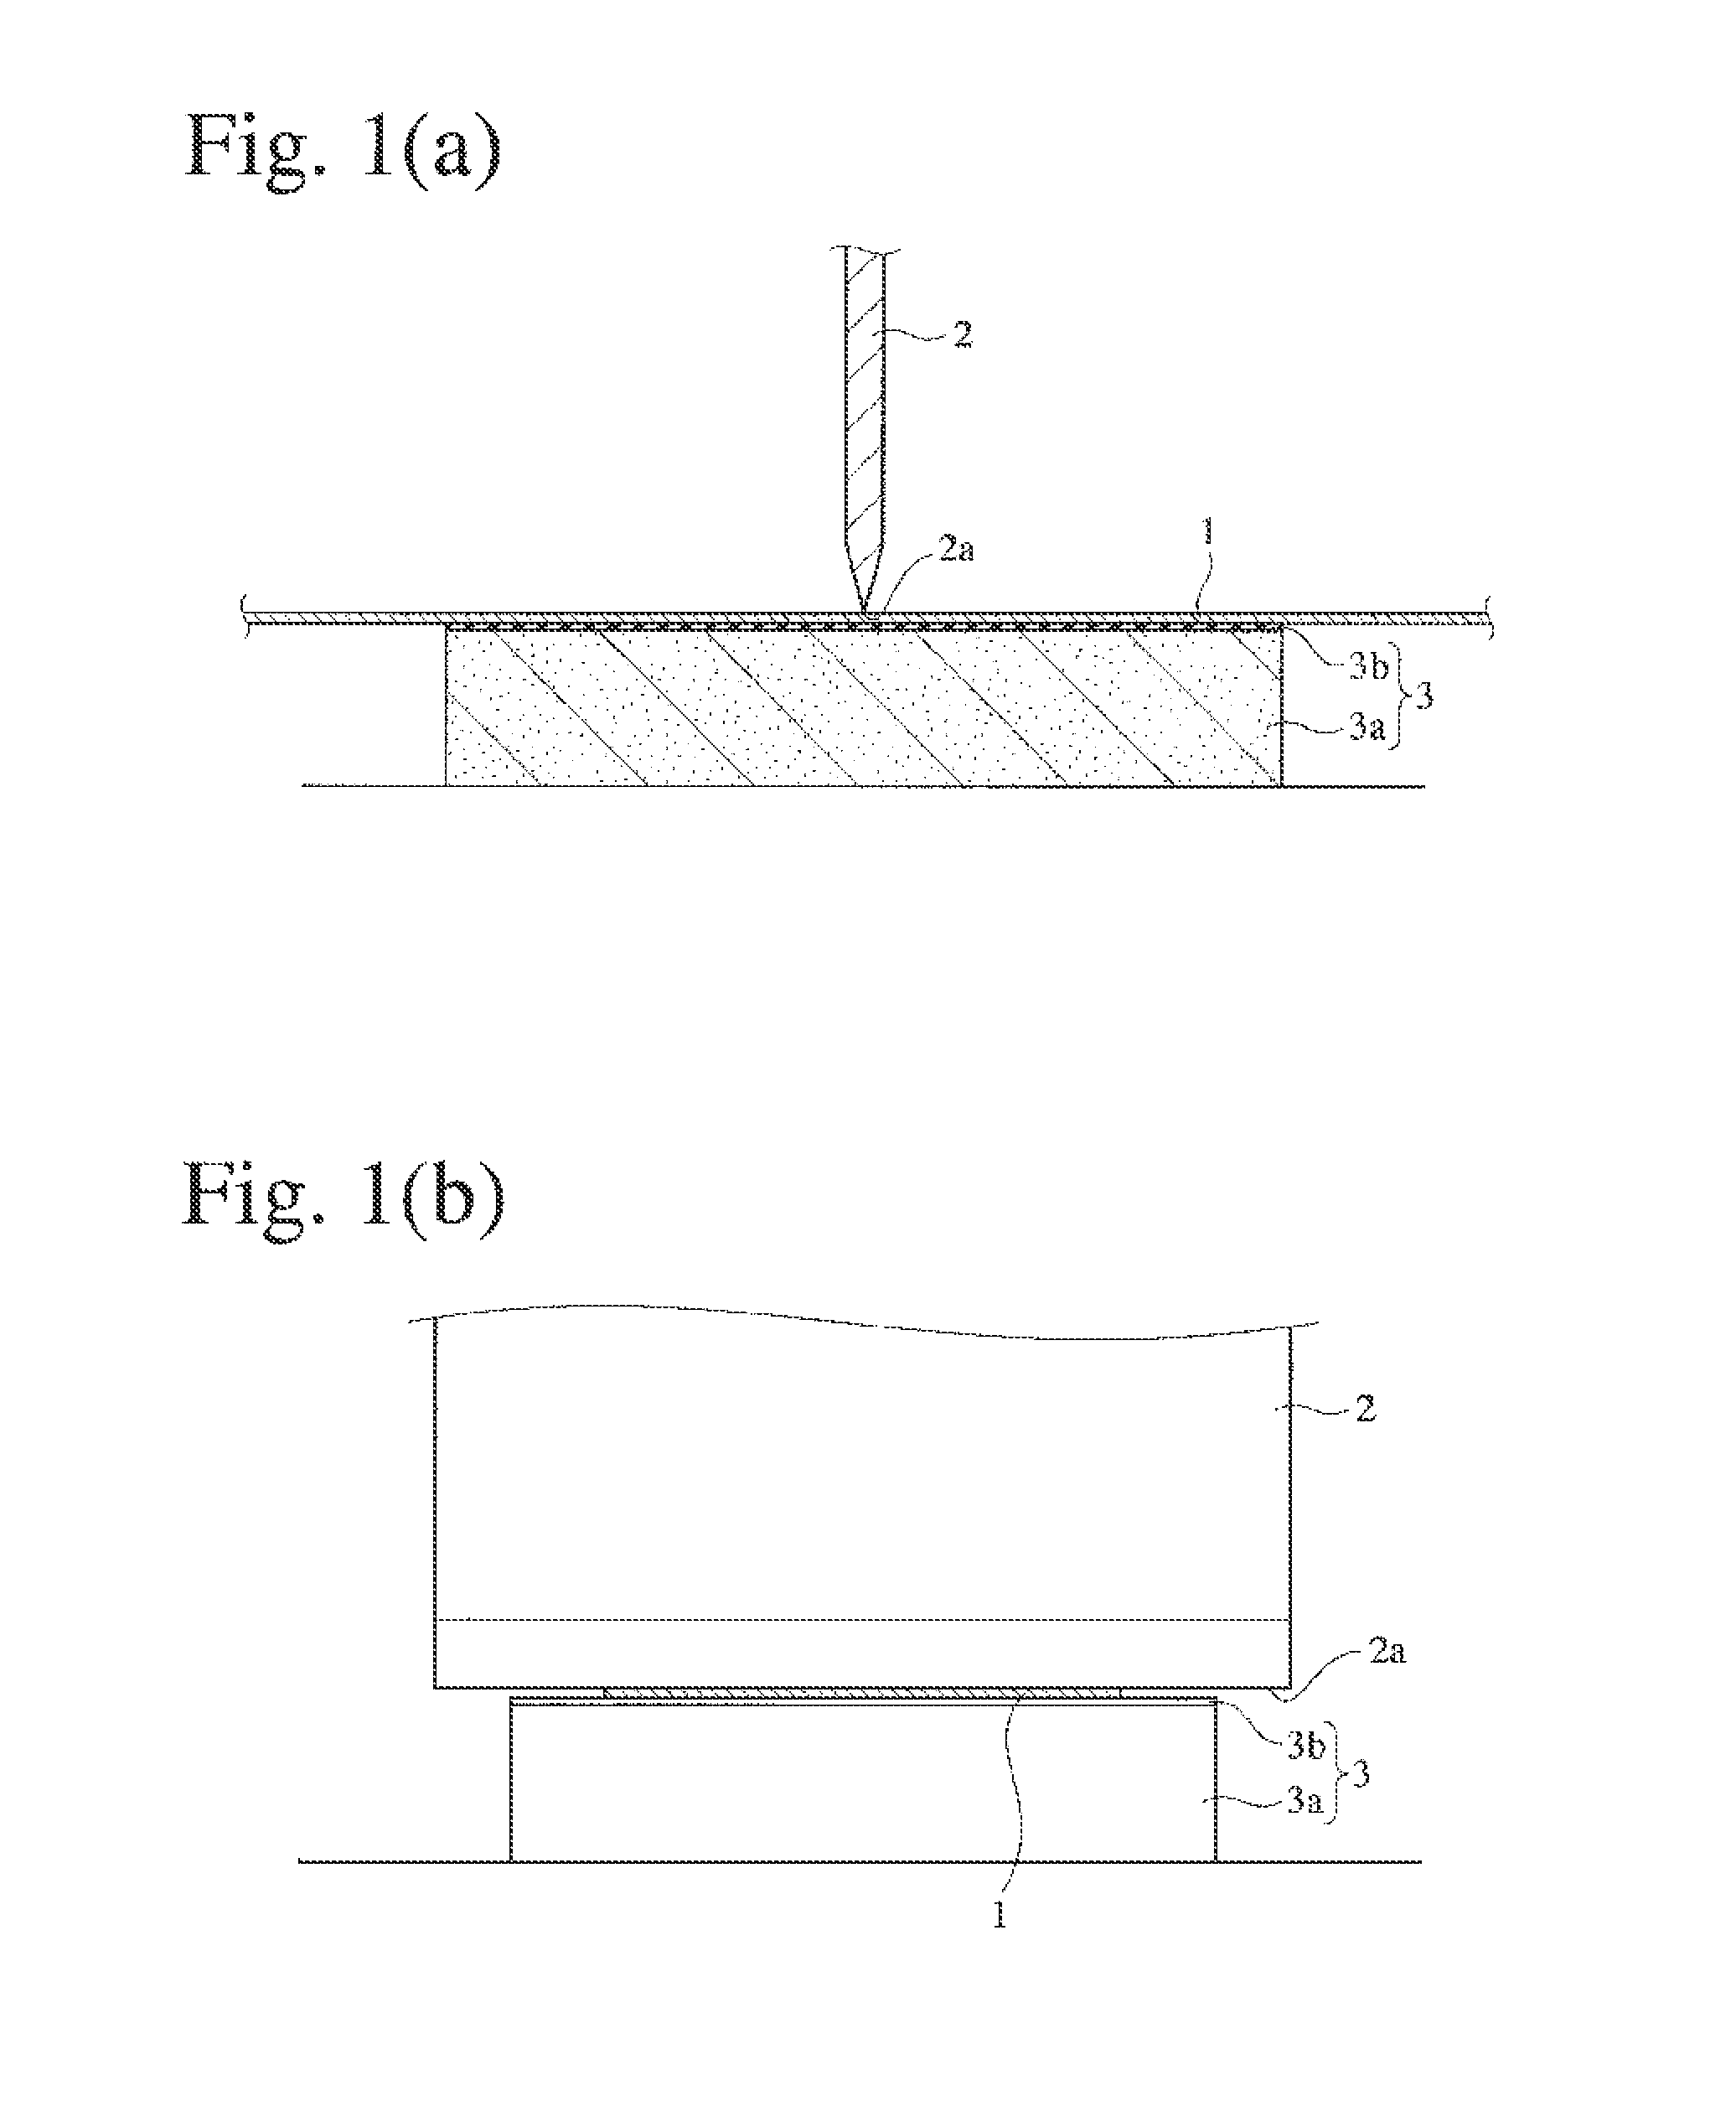 Primary ultrafine-crystalline alloy ribbon and its cutting method, and nano-crystalline, soft magnetic alloy ribbon and magnetic device using it